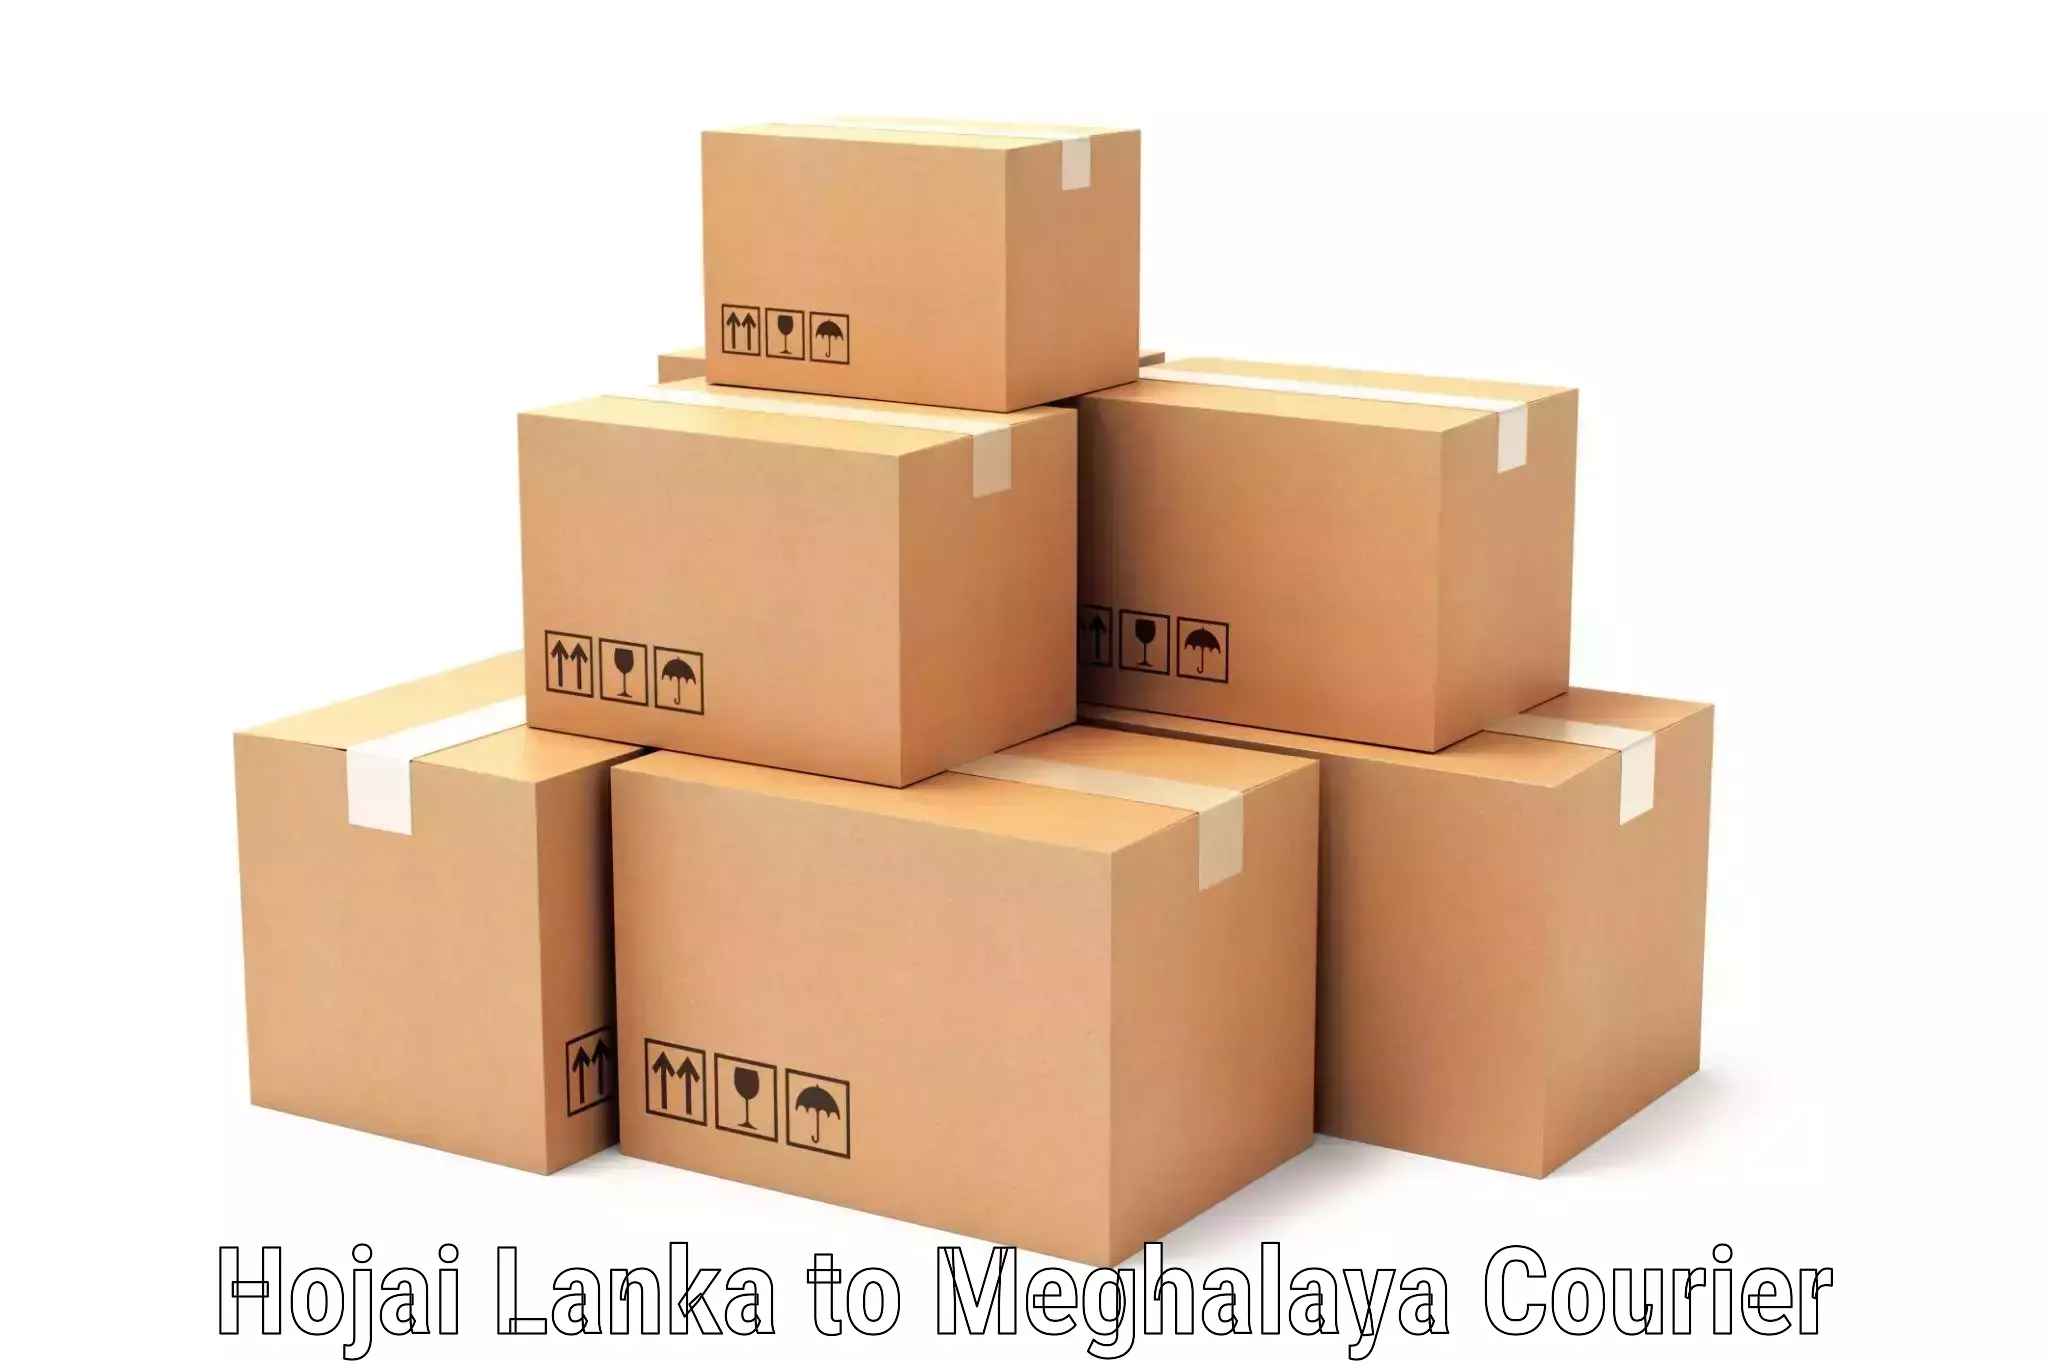 Scheduled delivery in Hojai Lanka to Meghalaya